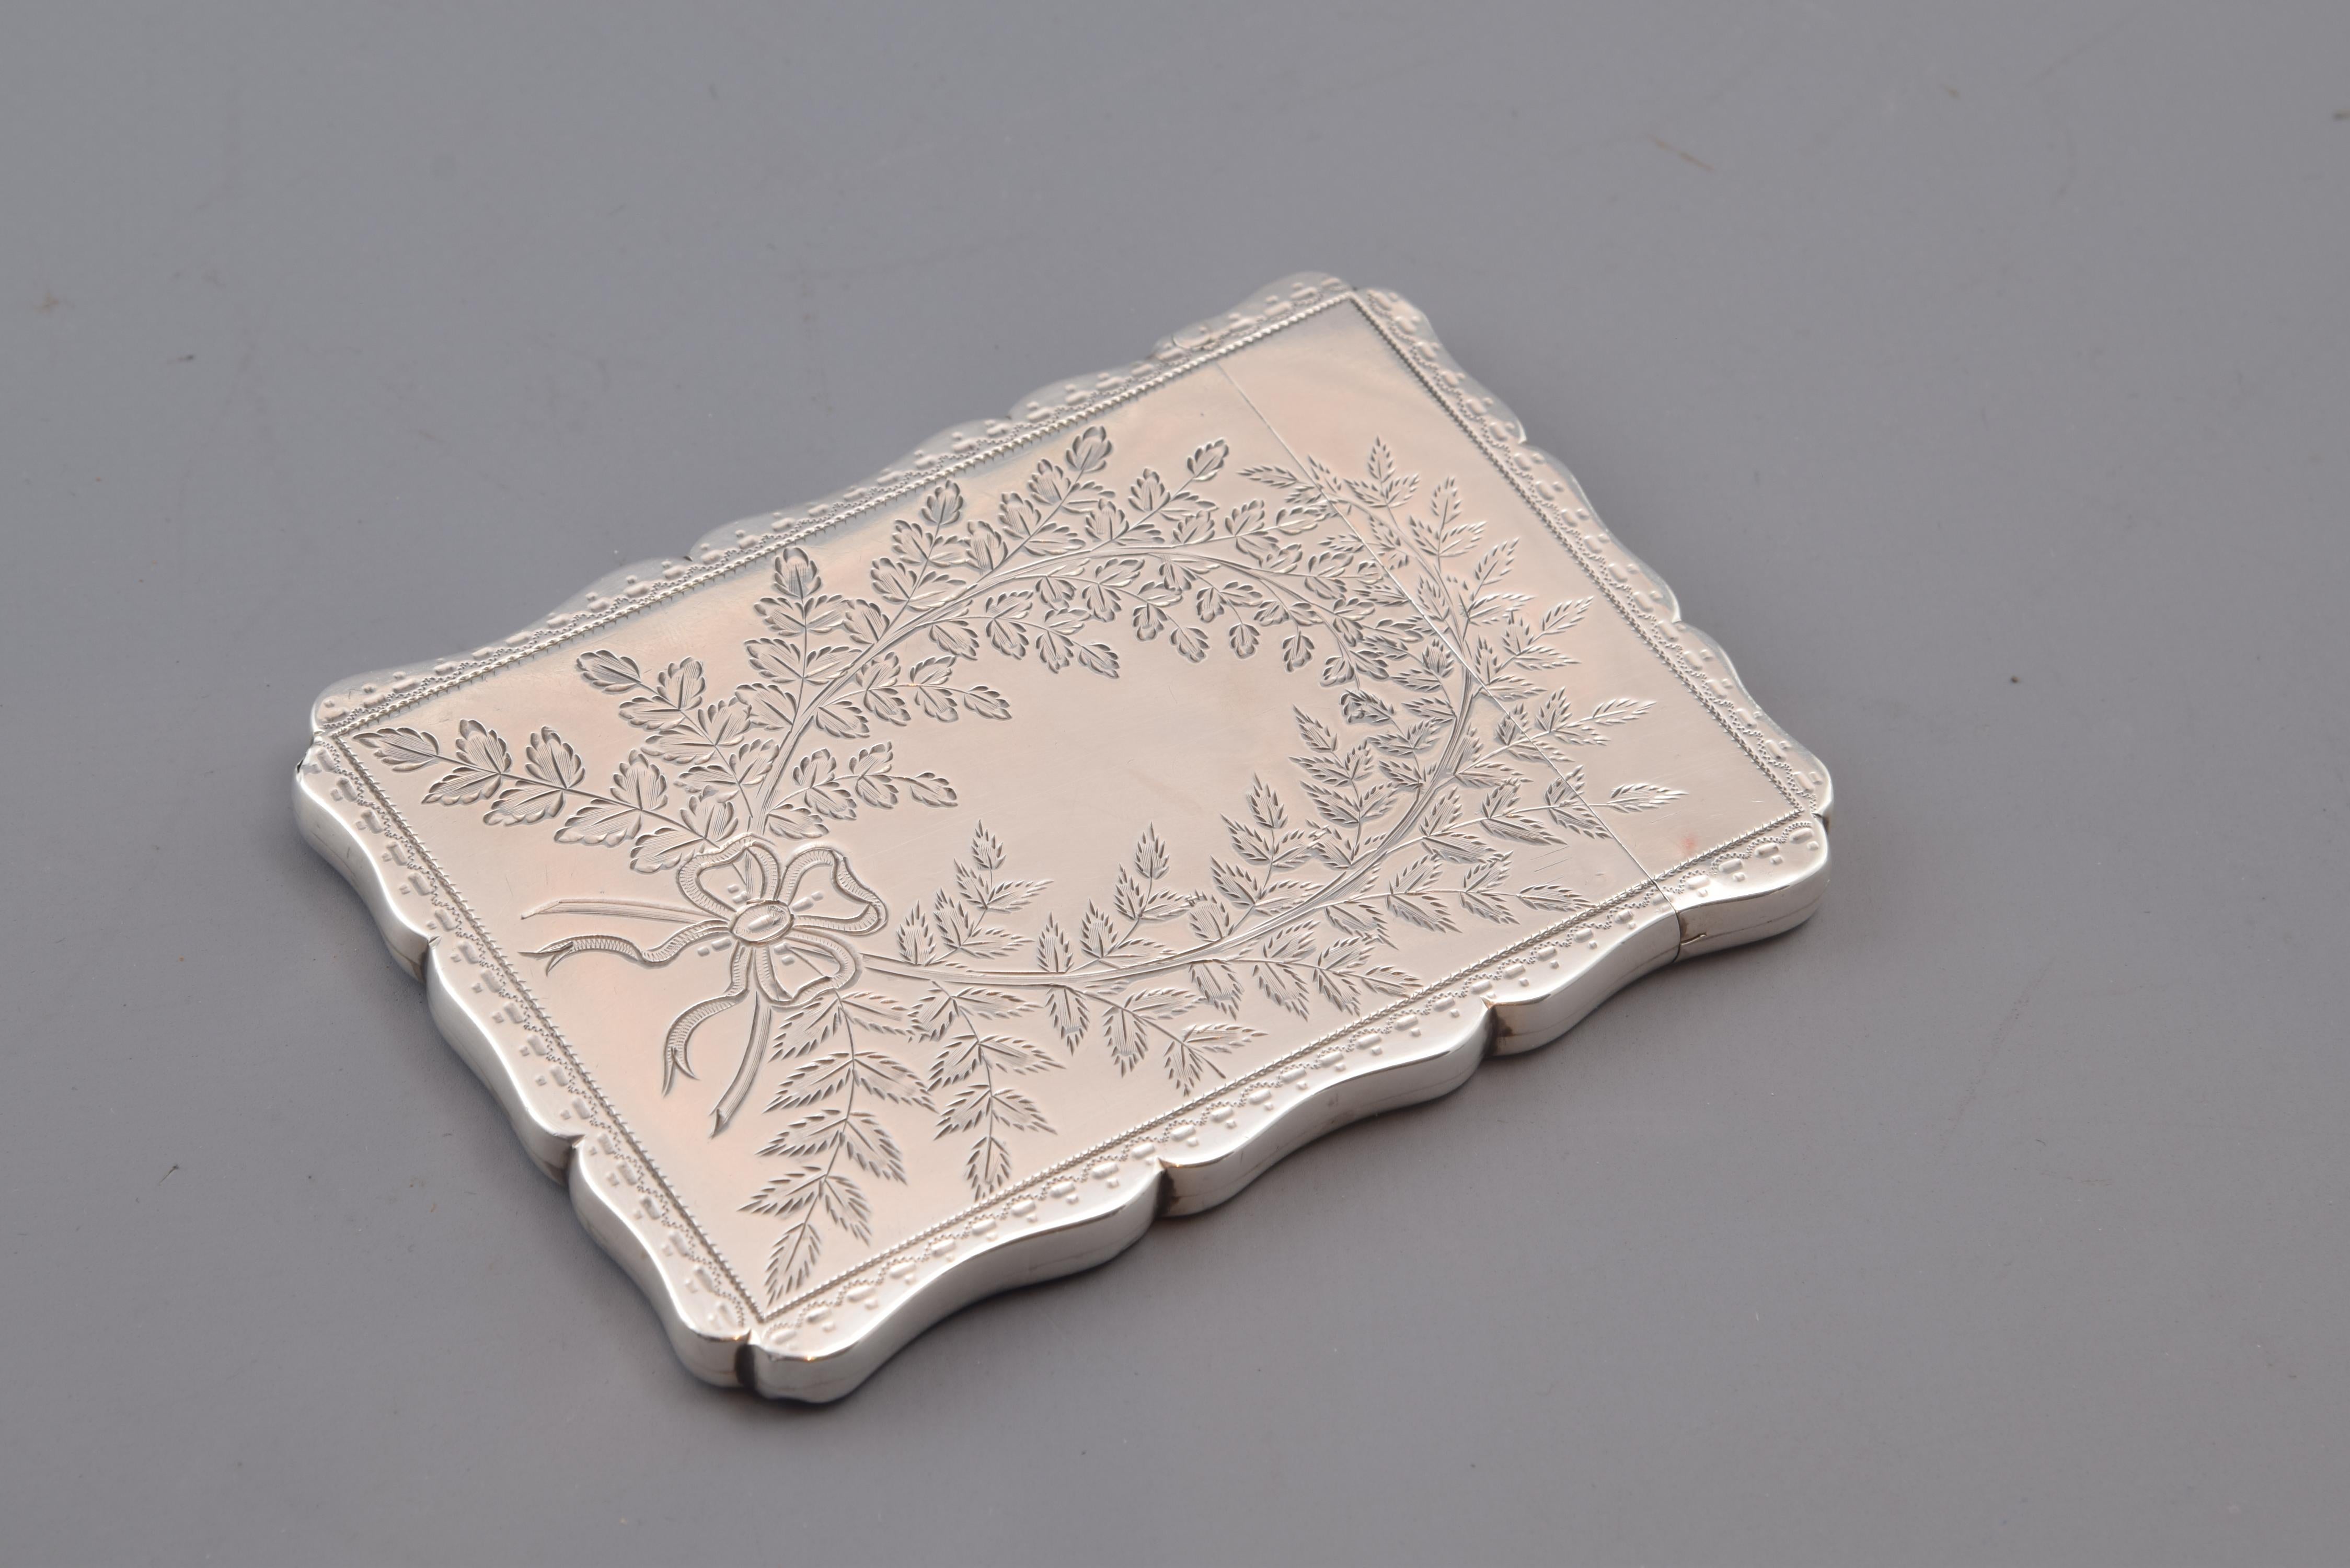 Silver card case, with hallmarks, Robert Thornton, Birmingham, England, 1877.
Card case with opening (hinge) on one of its smaller sides, made of silver in its color and decorated with a wavy edge and plant compositions on the sides (within frames,